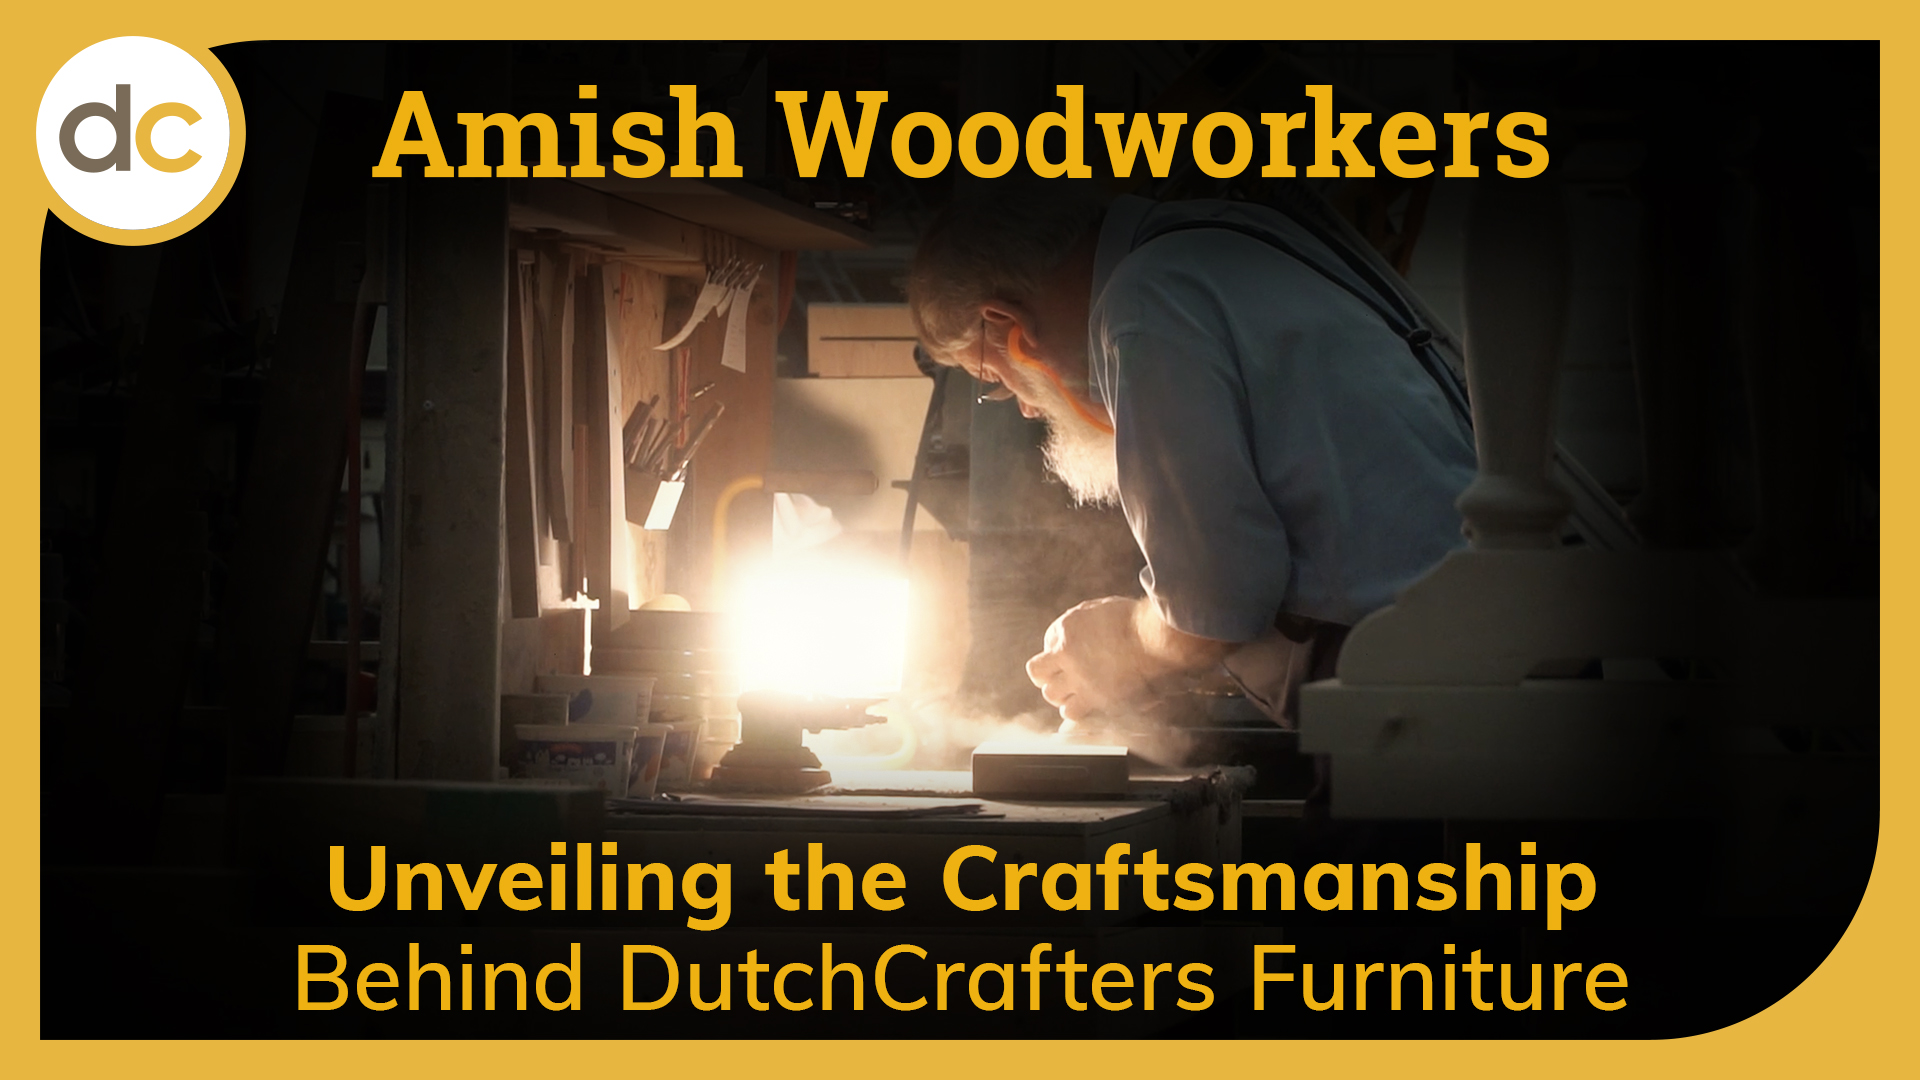 Video Thumbnail titled, "Amish Woodworkers: Unveiling the Craftsmanship Behind DutchCrafters Furniture"